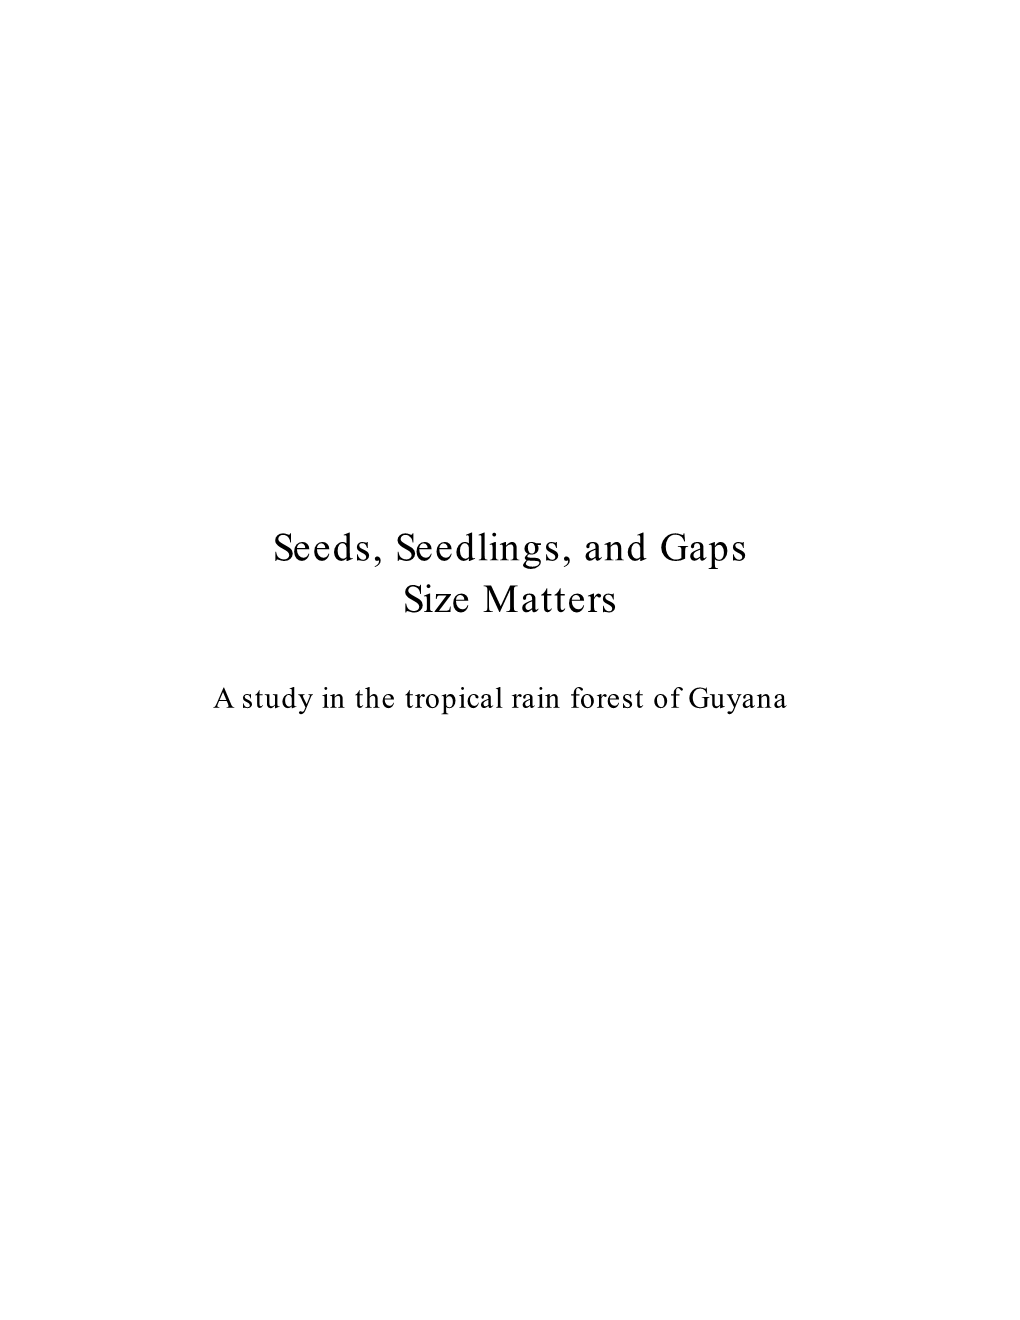 Seeds, Seedling and Gaps